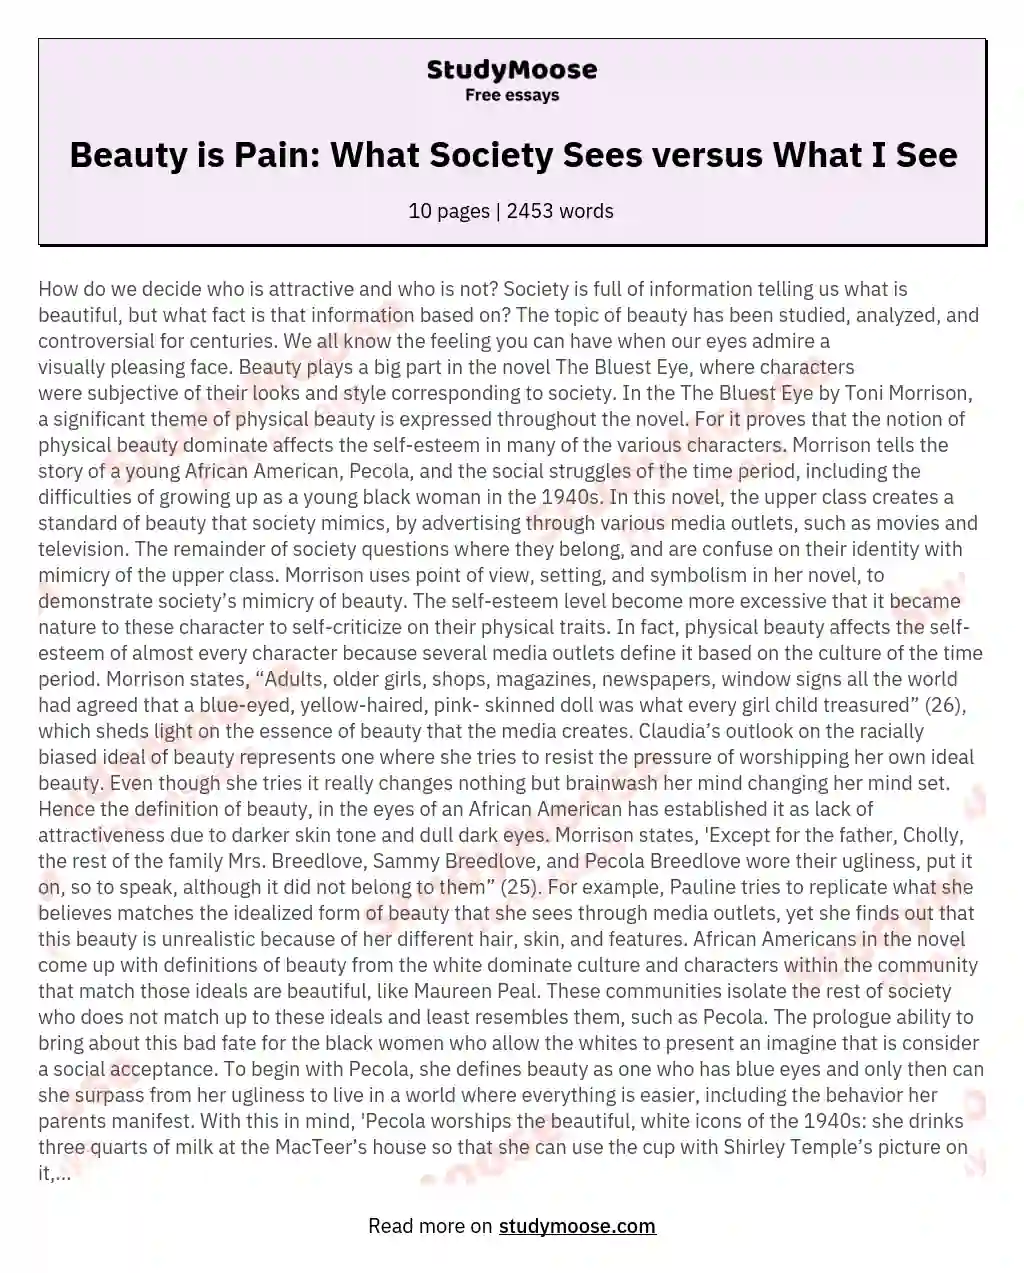 Beauty is Pain: What Society Sees versus What I See essay